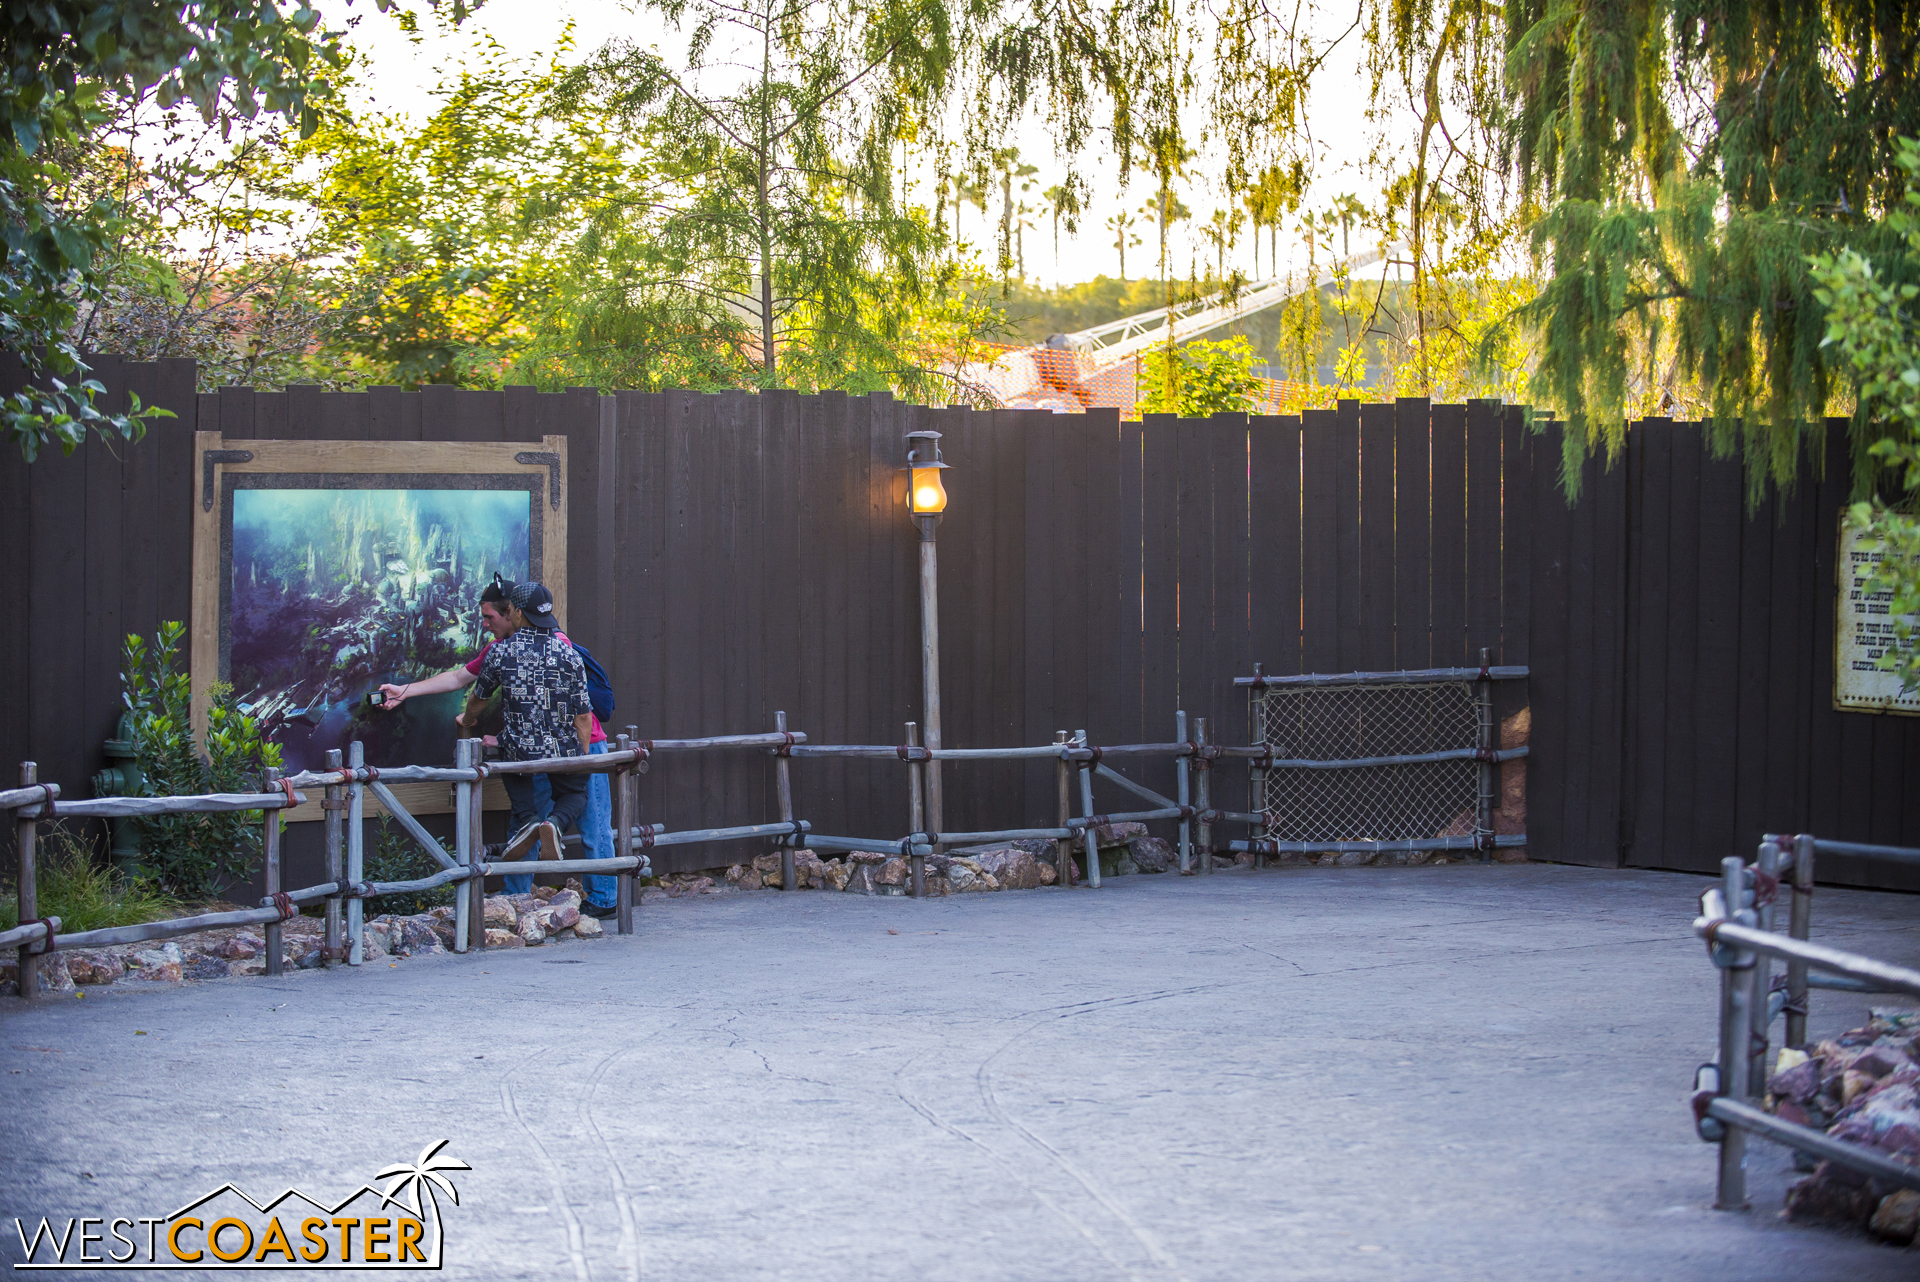  Meanwhile, at the dead end in Frontierland, beside Big Thunder Mountain Railroad, they've put up the new "Star Wars" Land rendering released last Monday. 